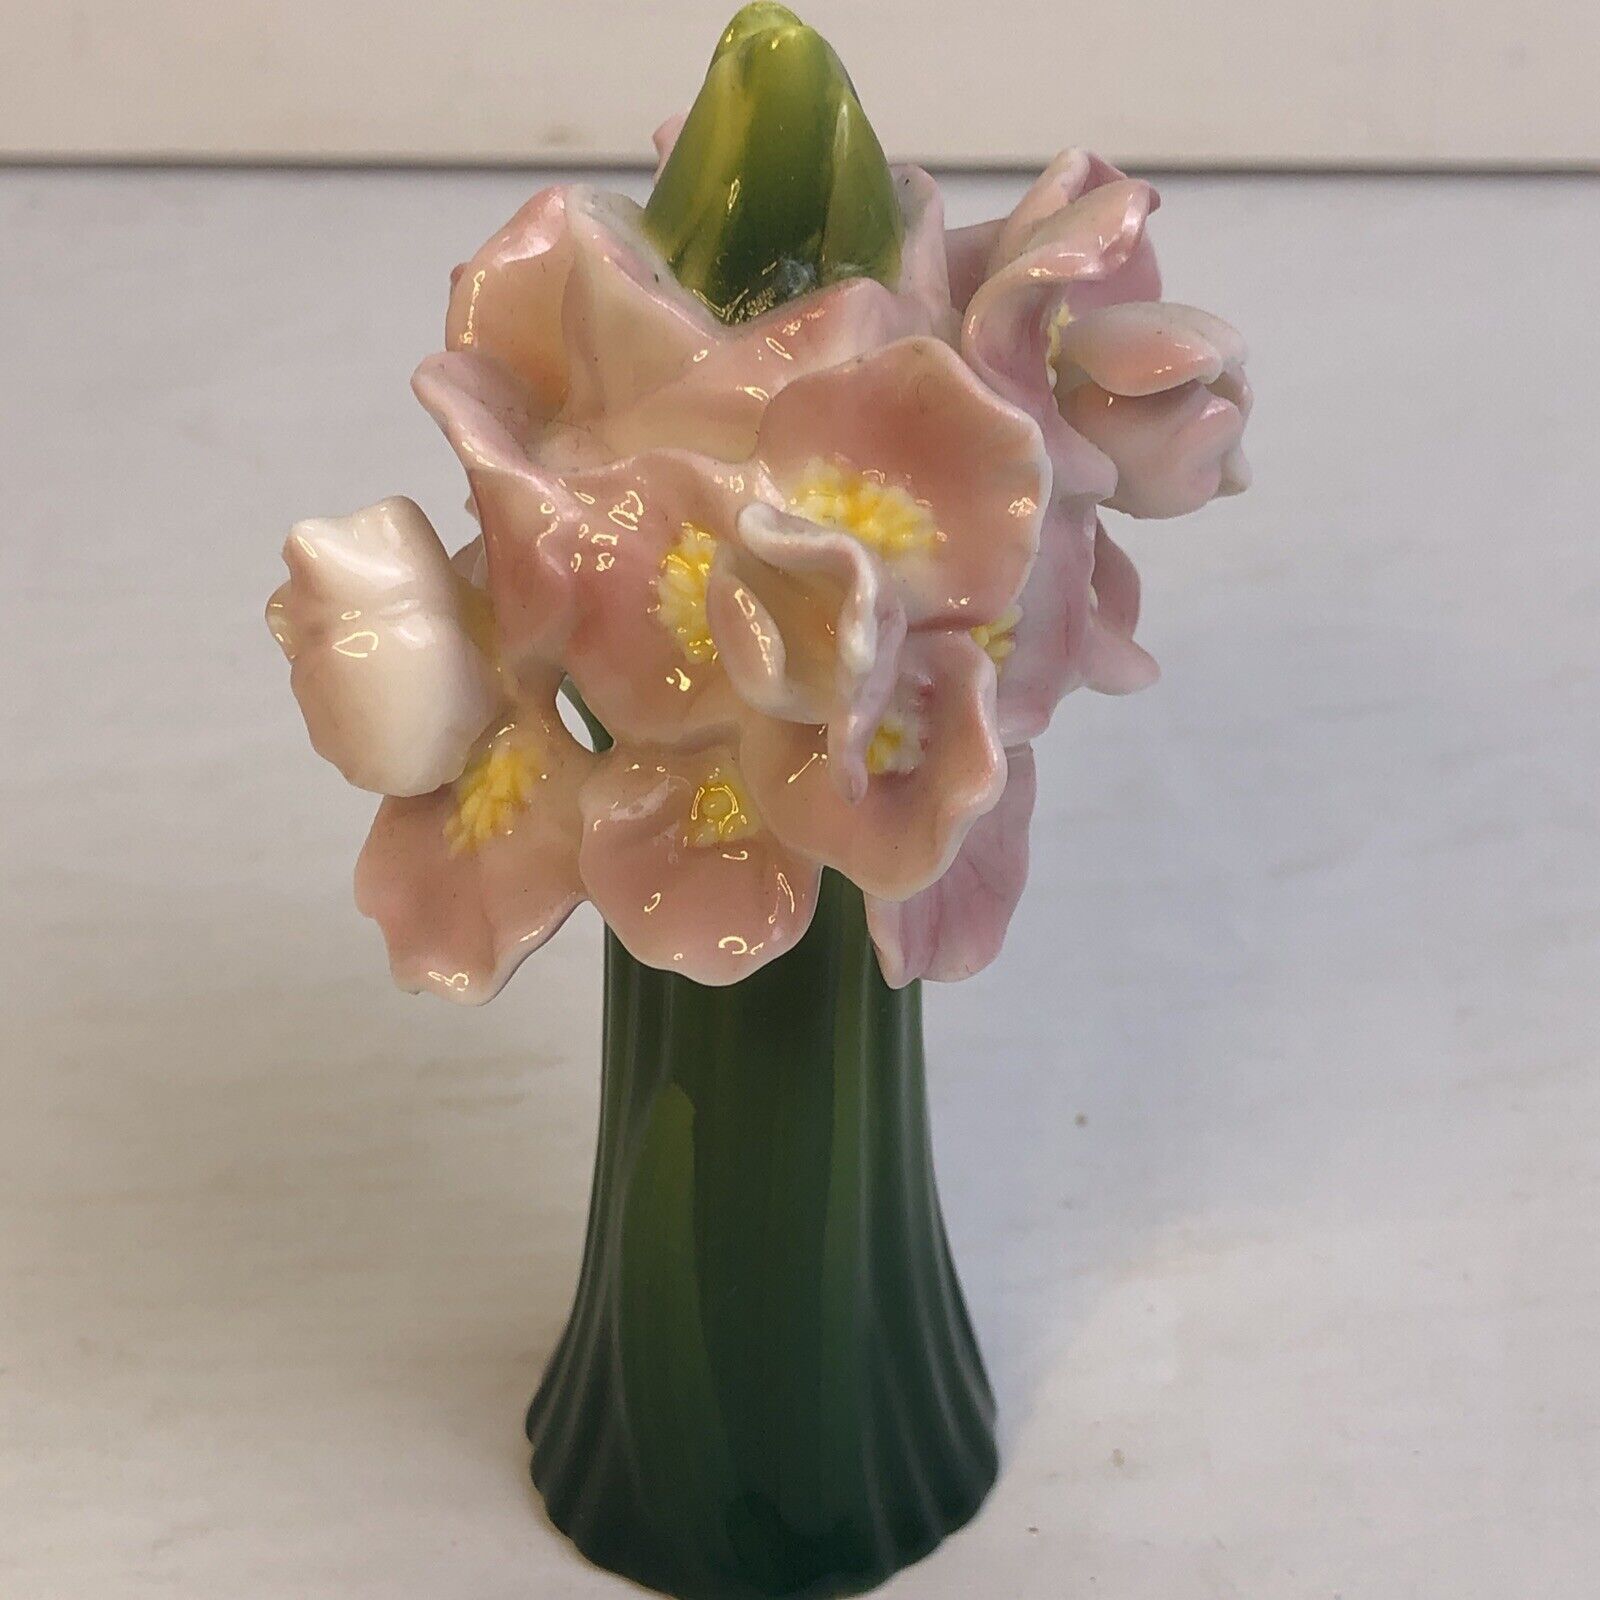 Ibis and Orchard Style Flowers In A Vase Sculpted 4” Tall Ceramic Sculpture